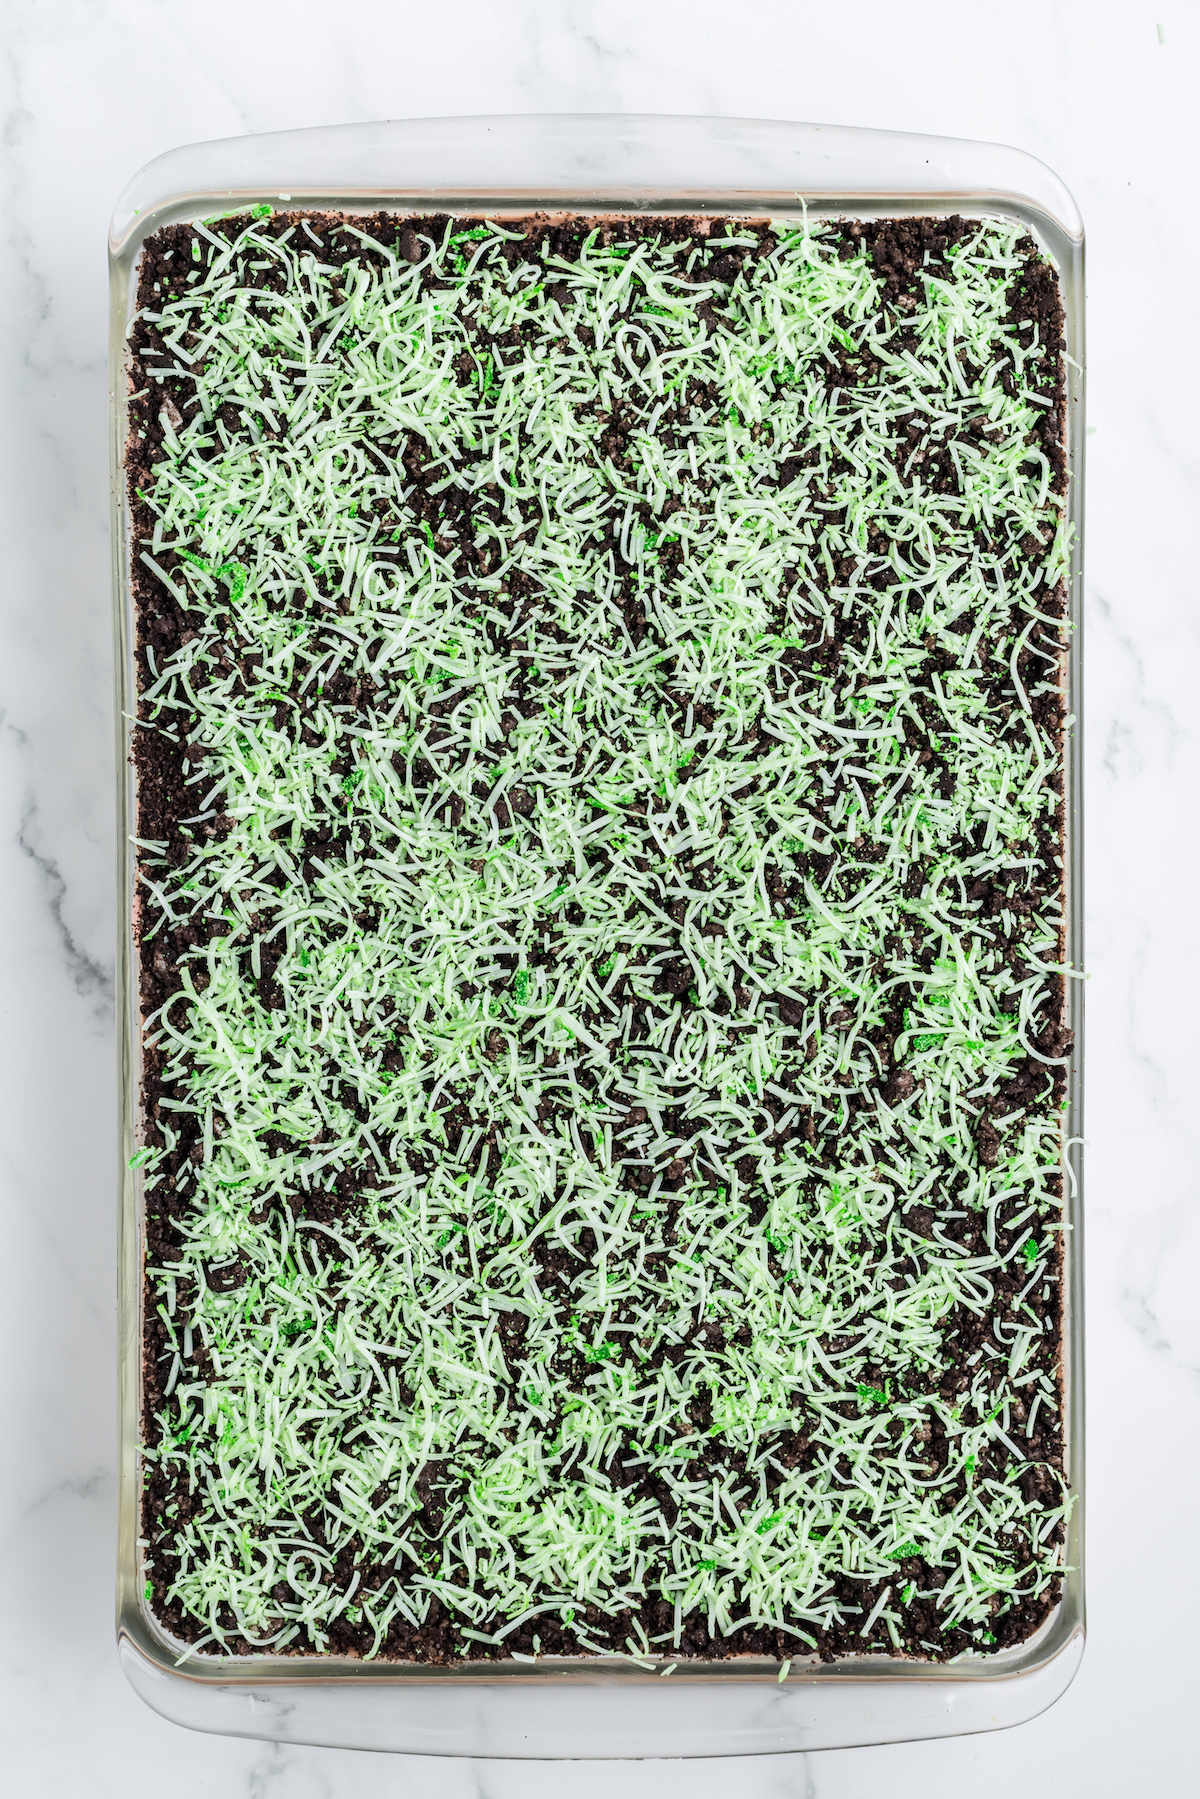 green tinted coconut used as grass in easter dirt cake